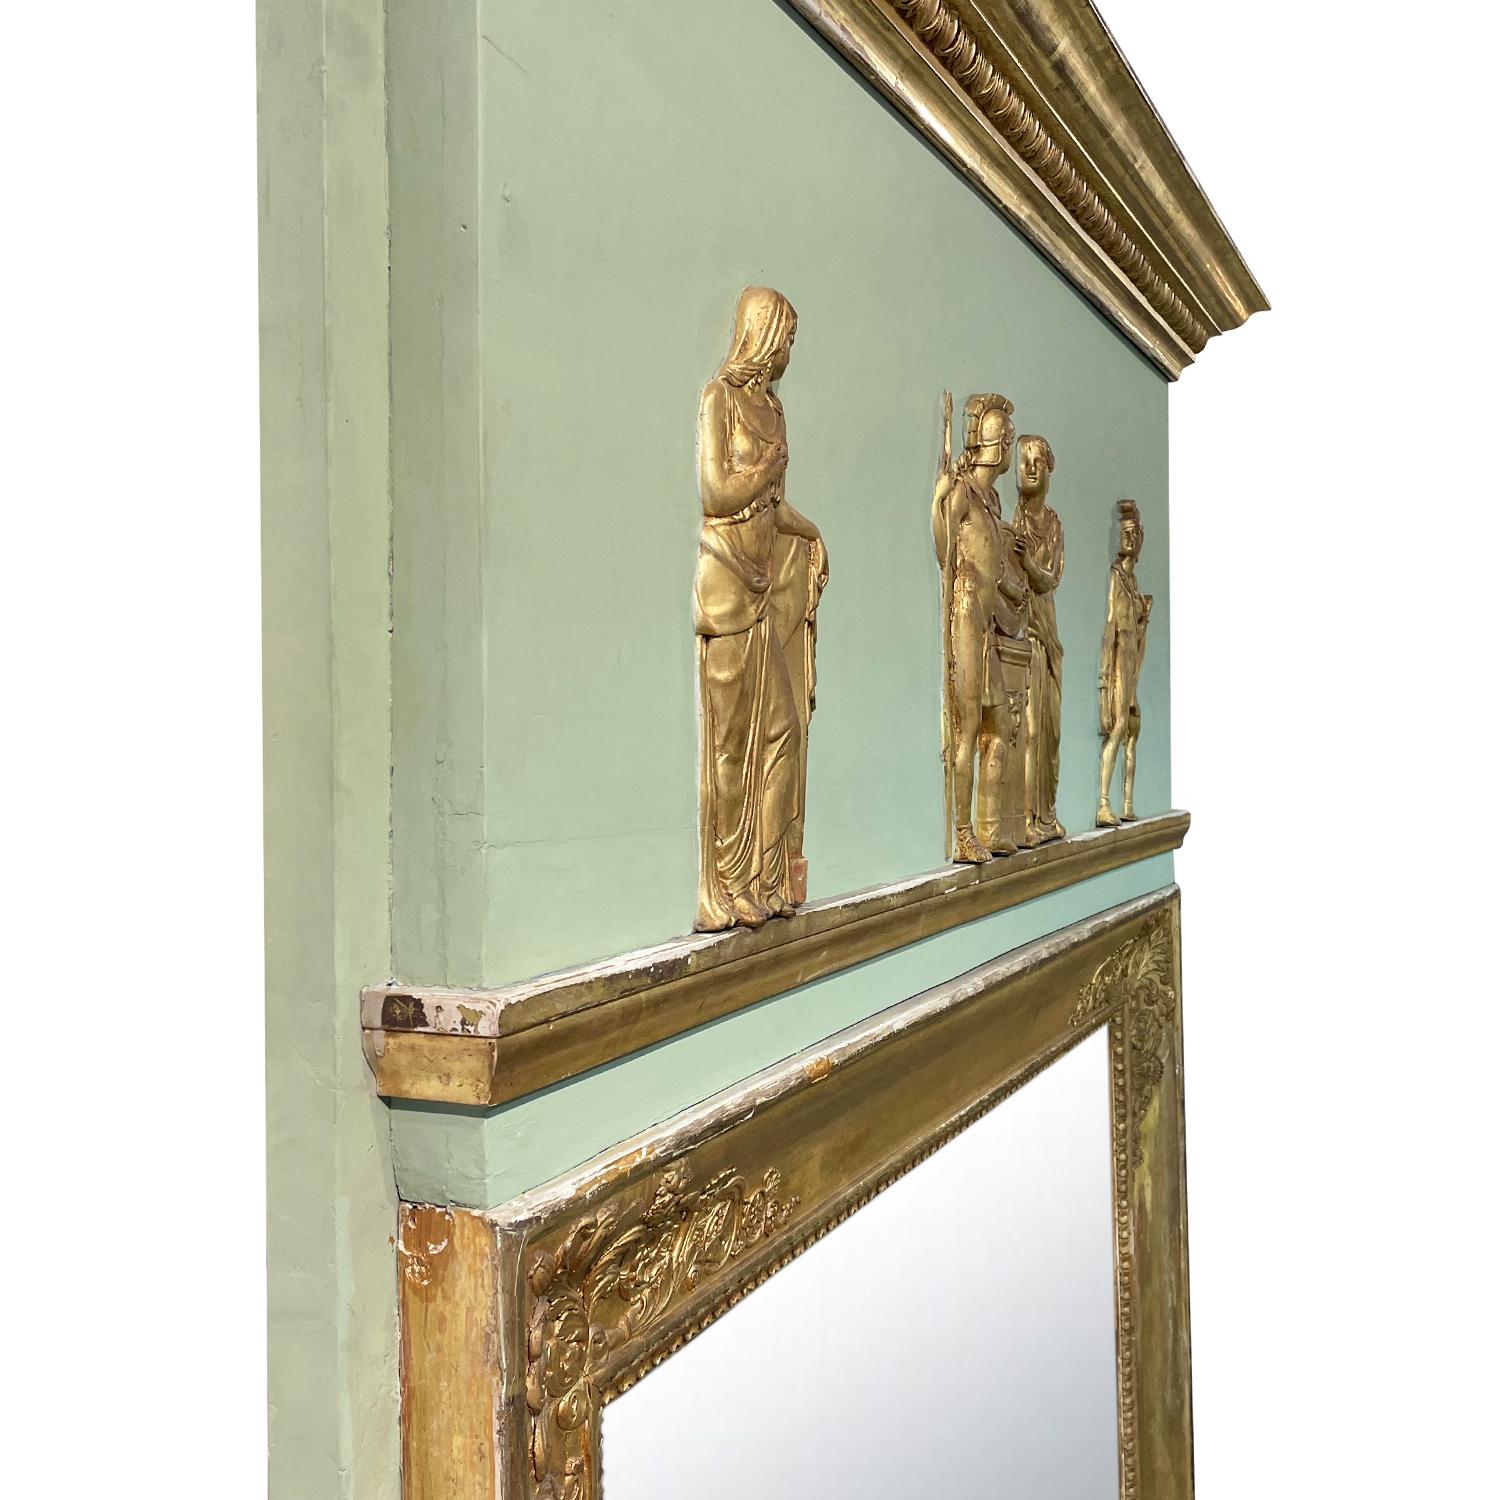 A gold-green, antique French large patinated Trumeau mirror made of handcrafted Giltwood with its original mirror glass, in good condition. The wall décor piece is enhanced by detailed cornice as well as a gilded frieze with figural scenes,